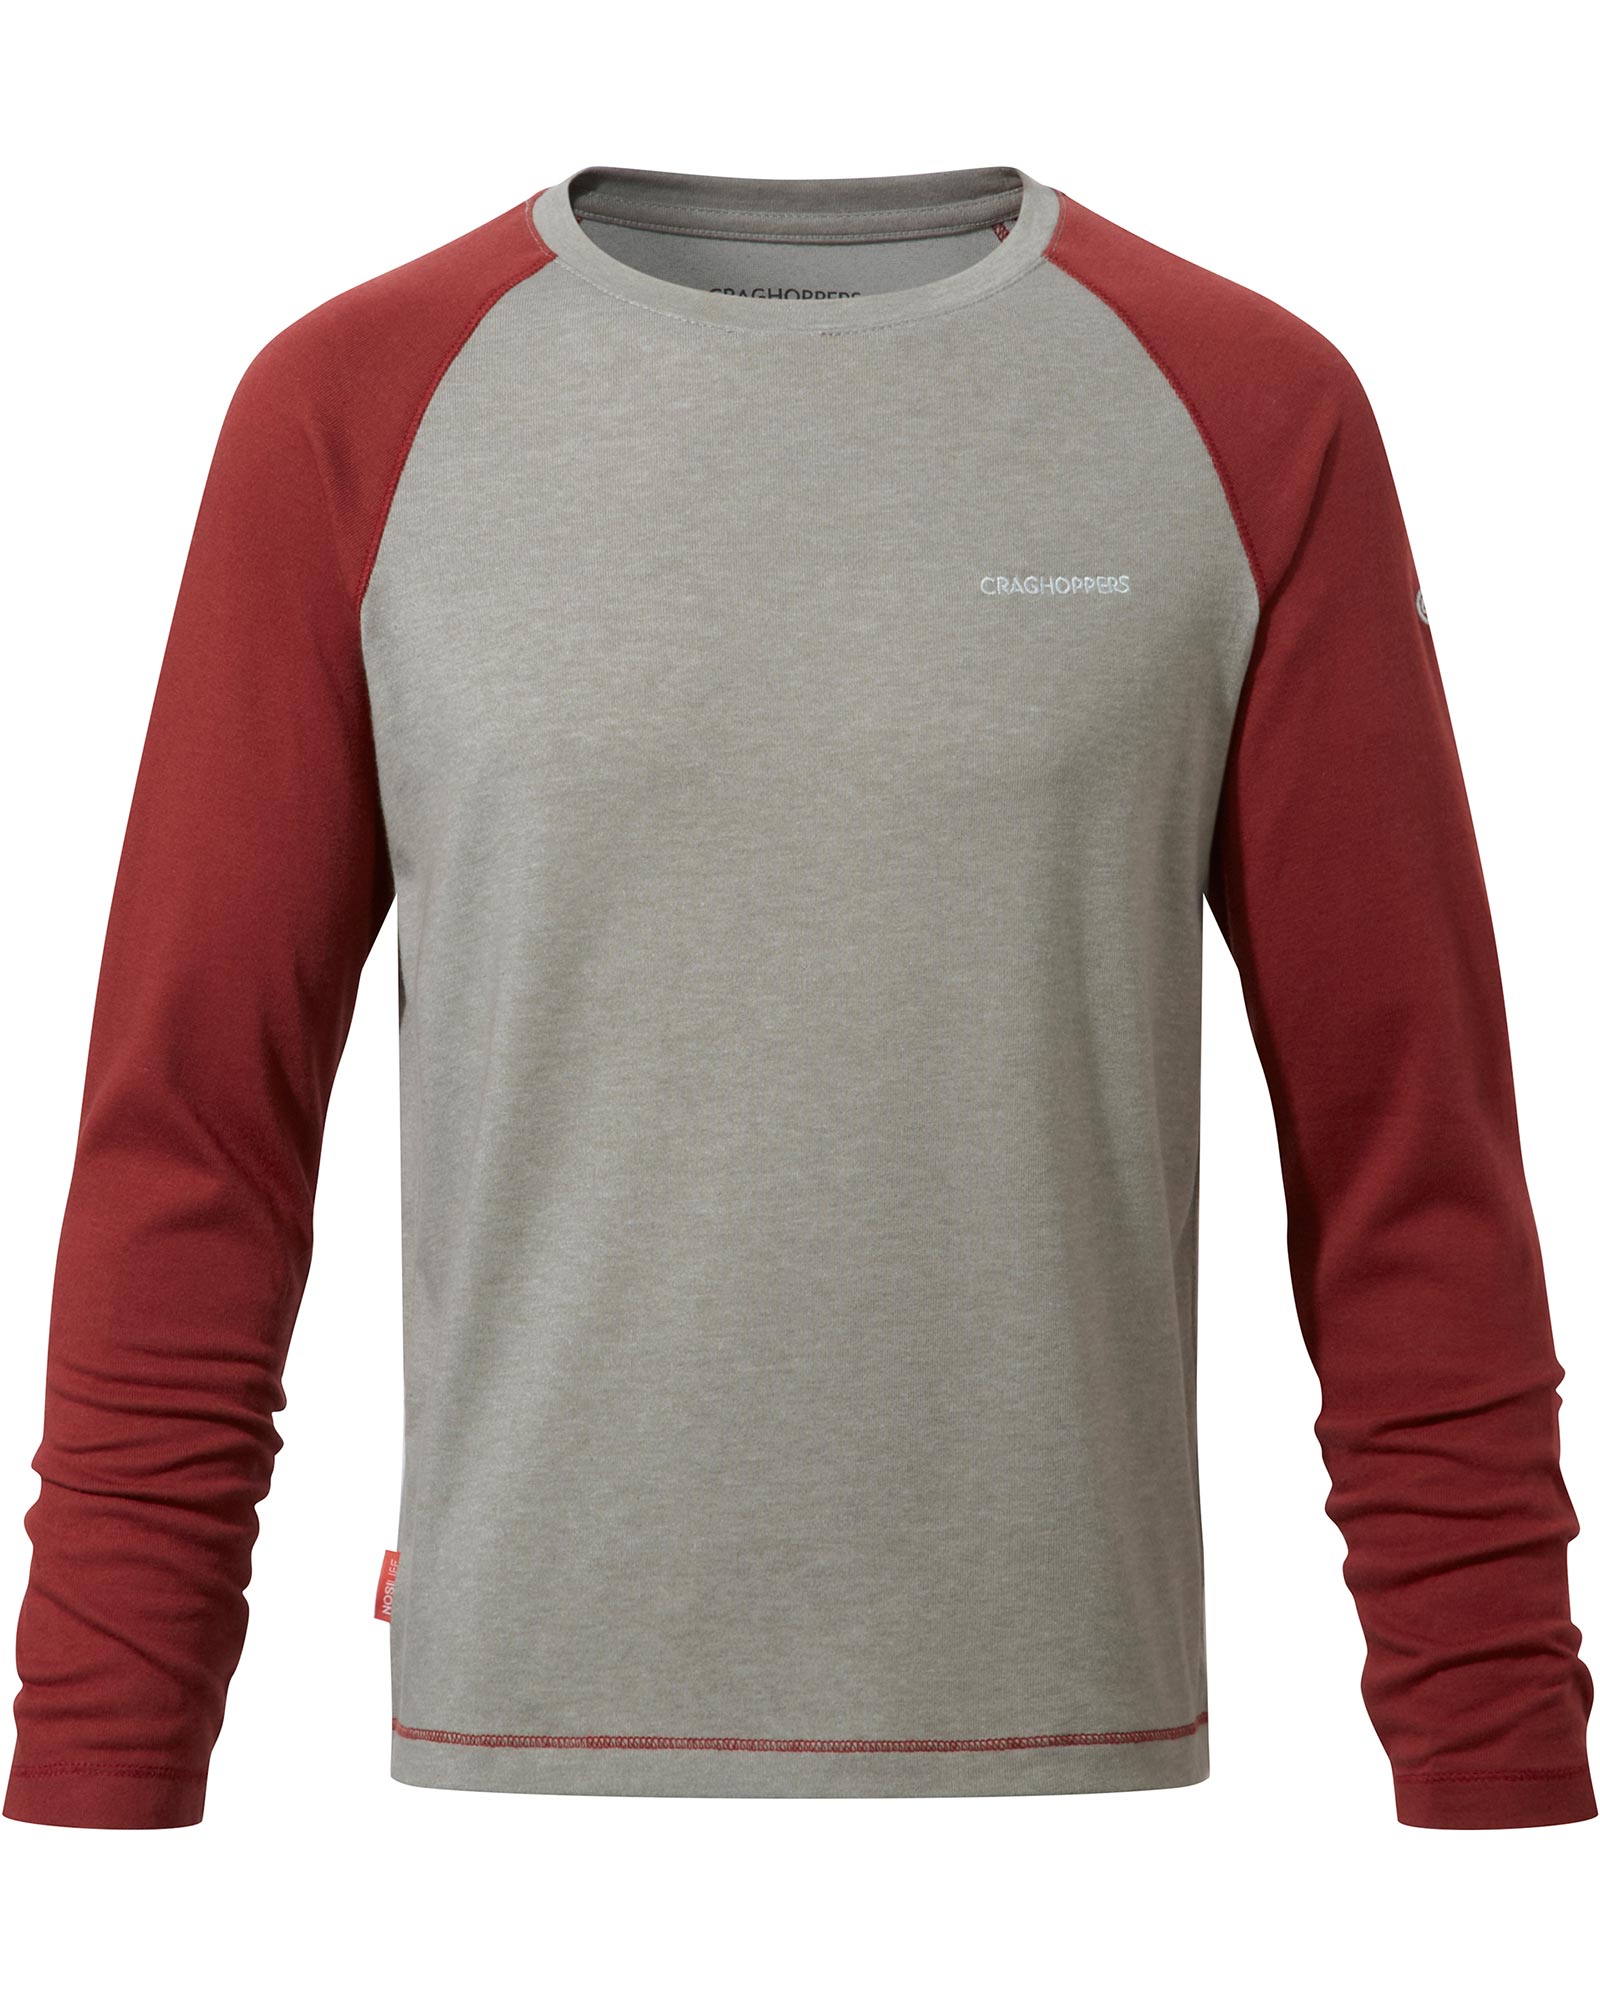 Craghoppers NosiLife Barnaby Kids’ Long Sleeve T Shirt - Carmine Red 9 Years